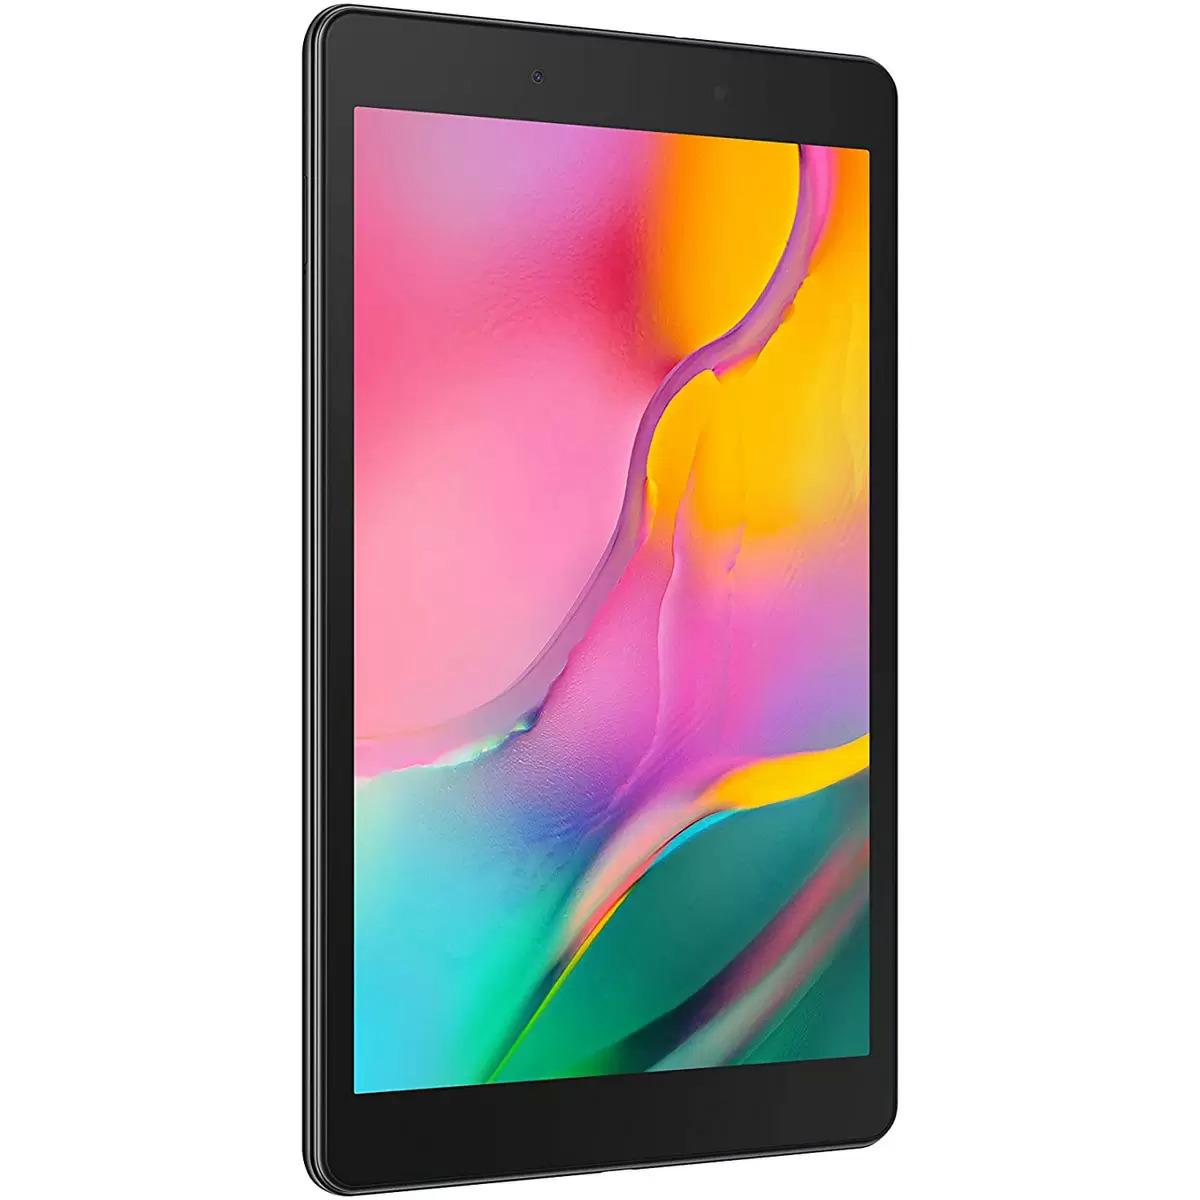 Samsung Galaxy Tab A 8in 64GB Android Tablet for $129.99 Shipped